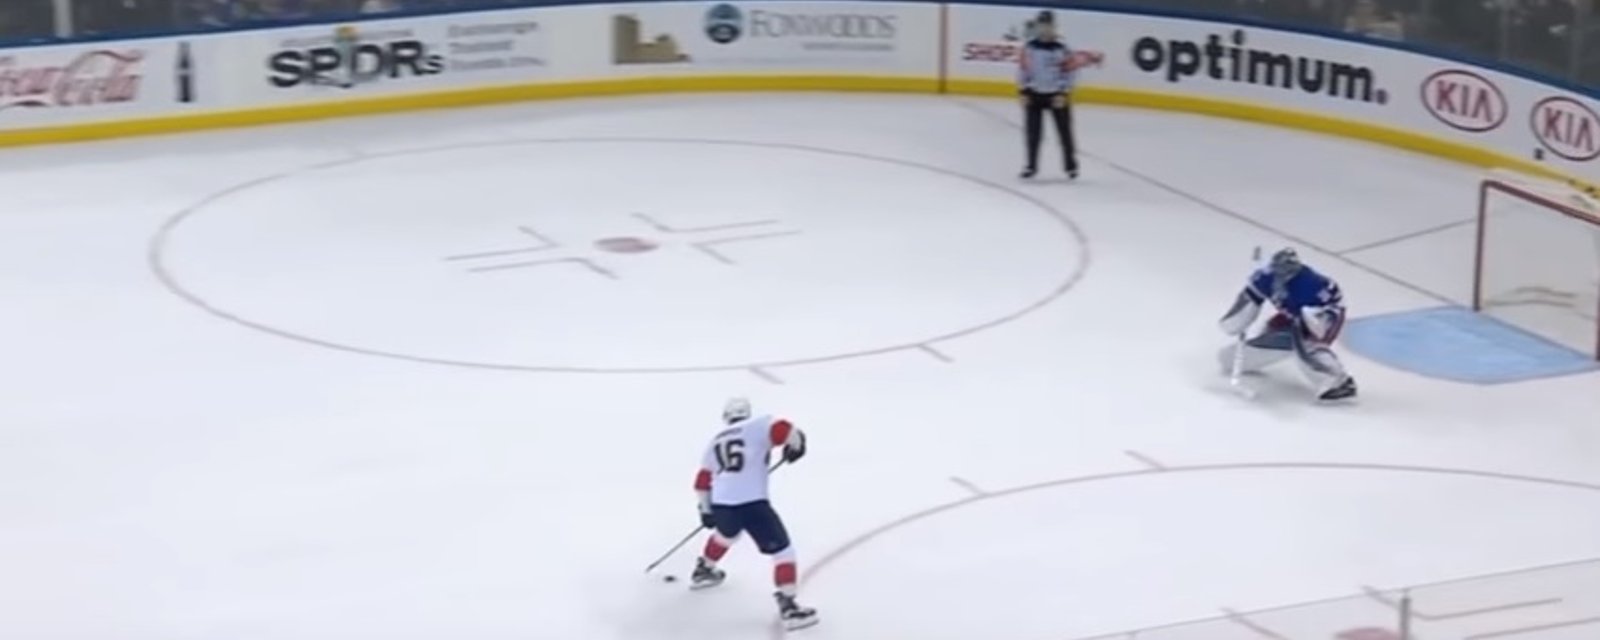 Must See: This Aleksander Barkov shootout compilation is insane